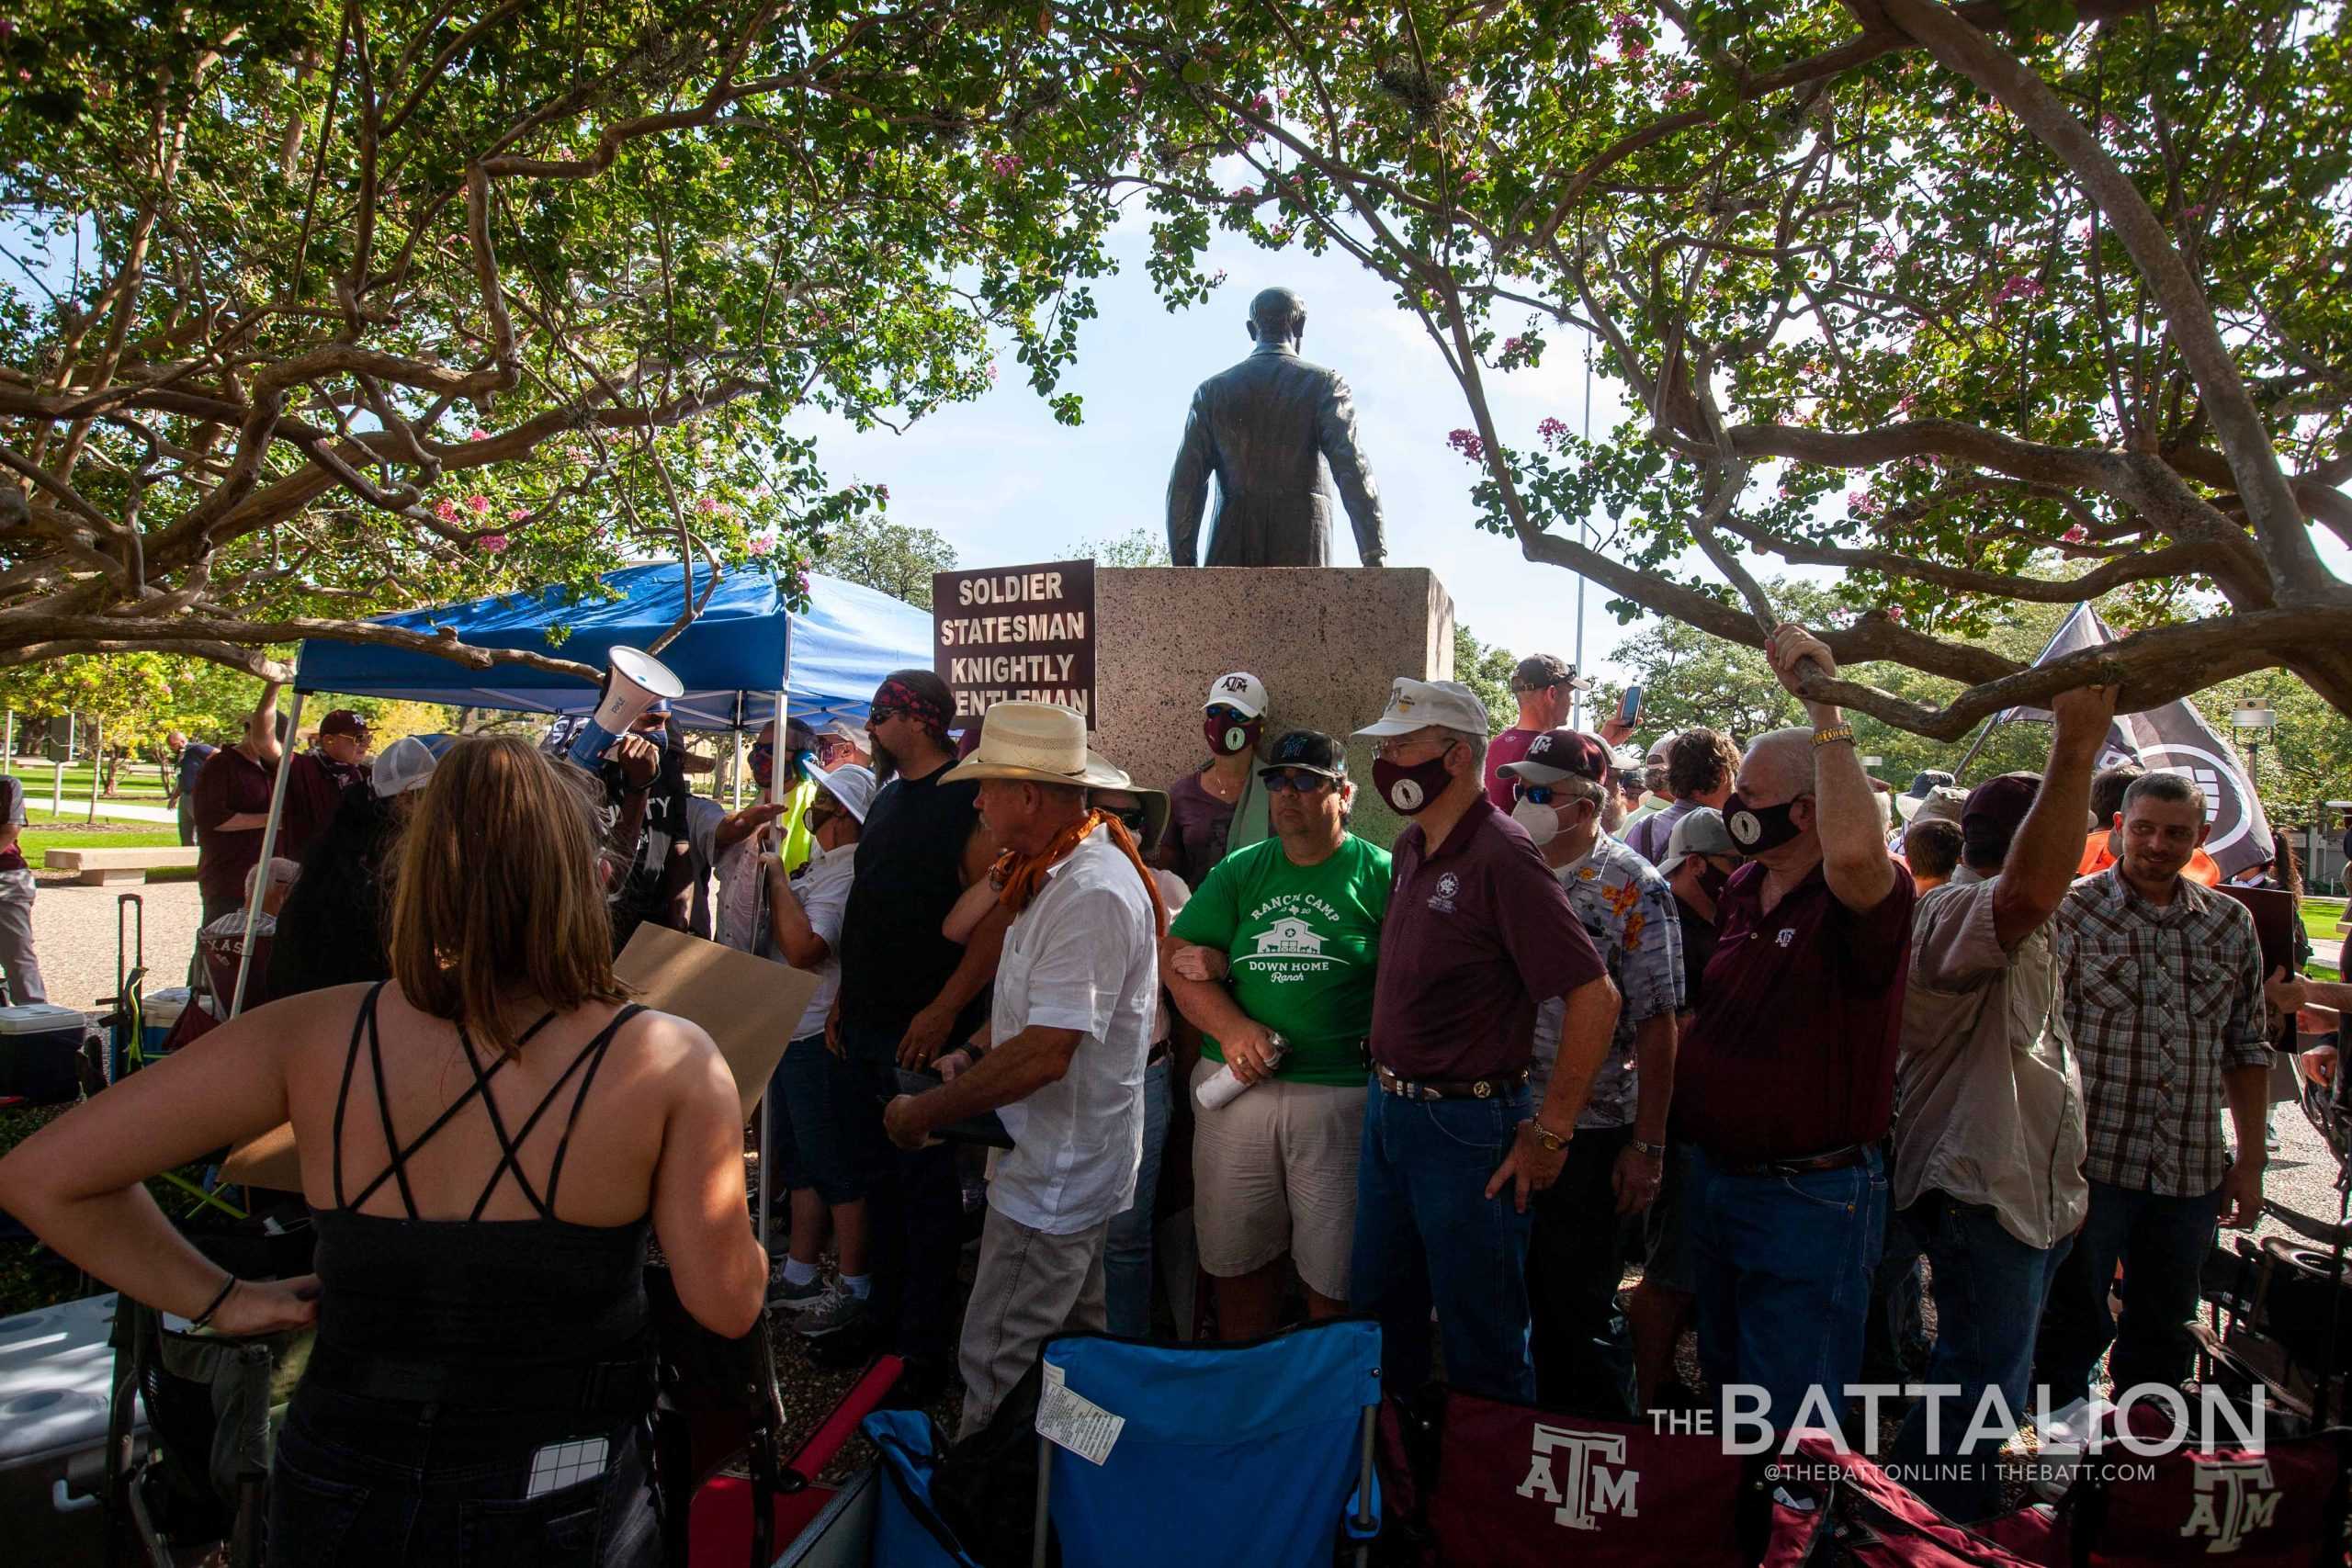 More+than+200+protesters+gather+in+Academic+Plaza+for+third+Sully+protest